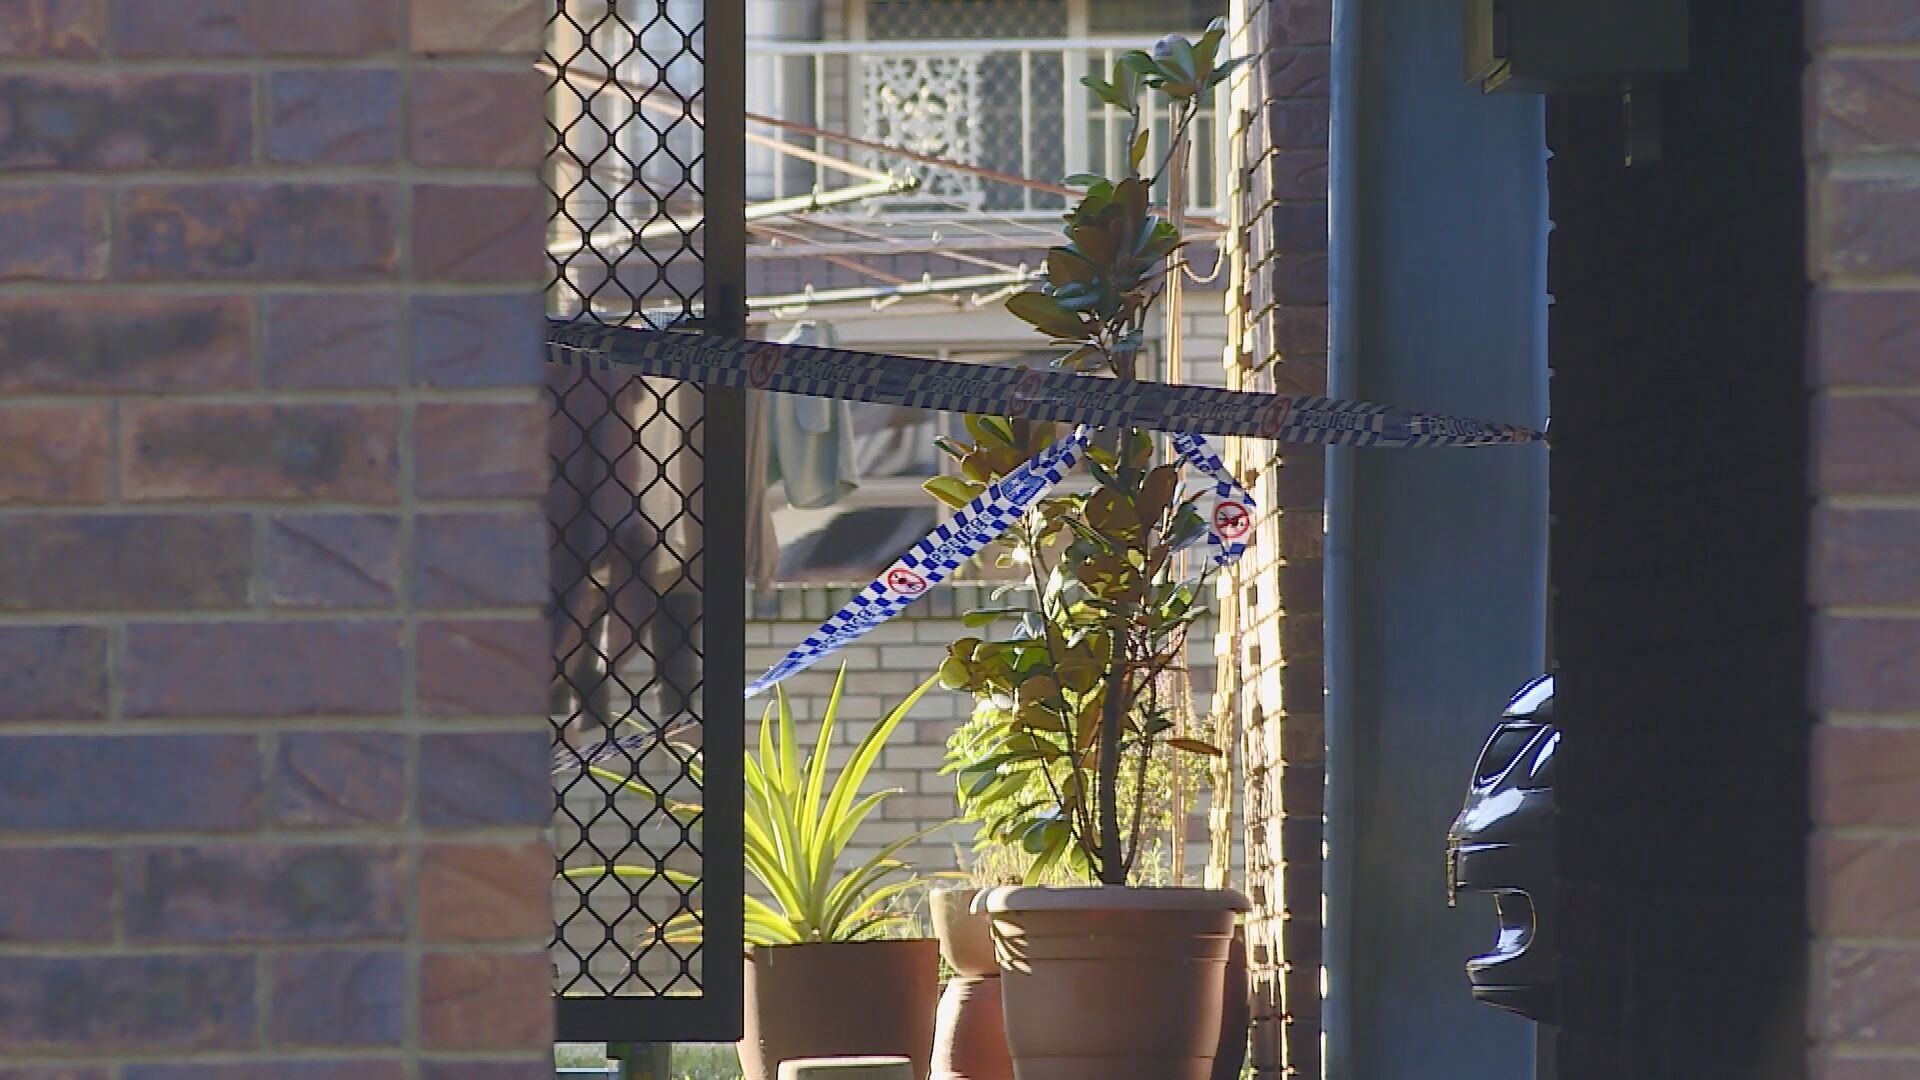 A man and a child have been found dead in a home on New South Wales' Far North Coast overnight.